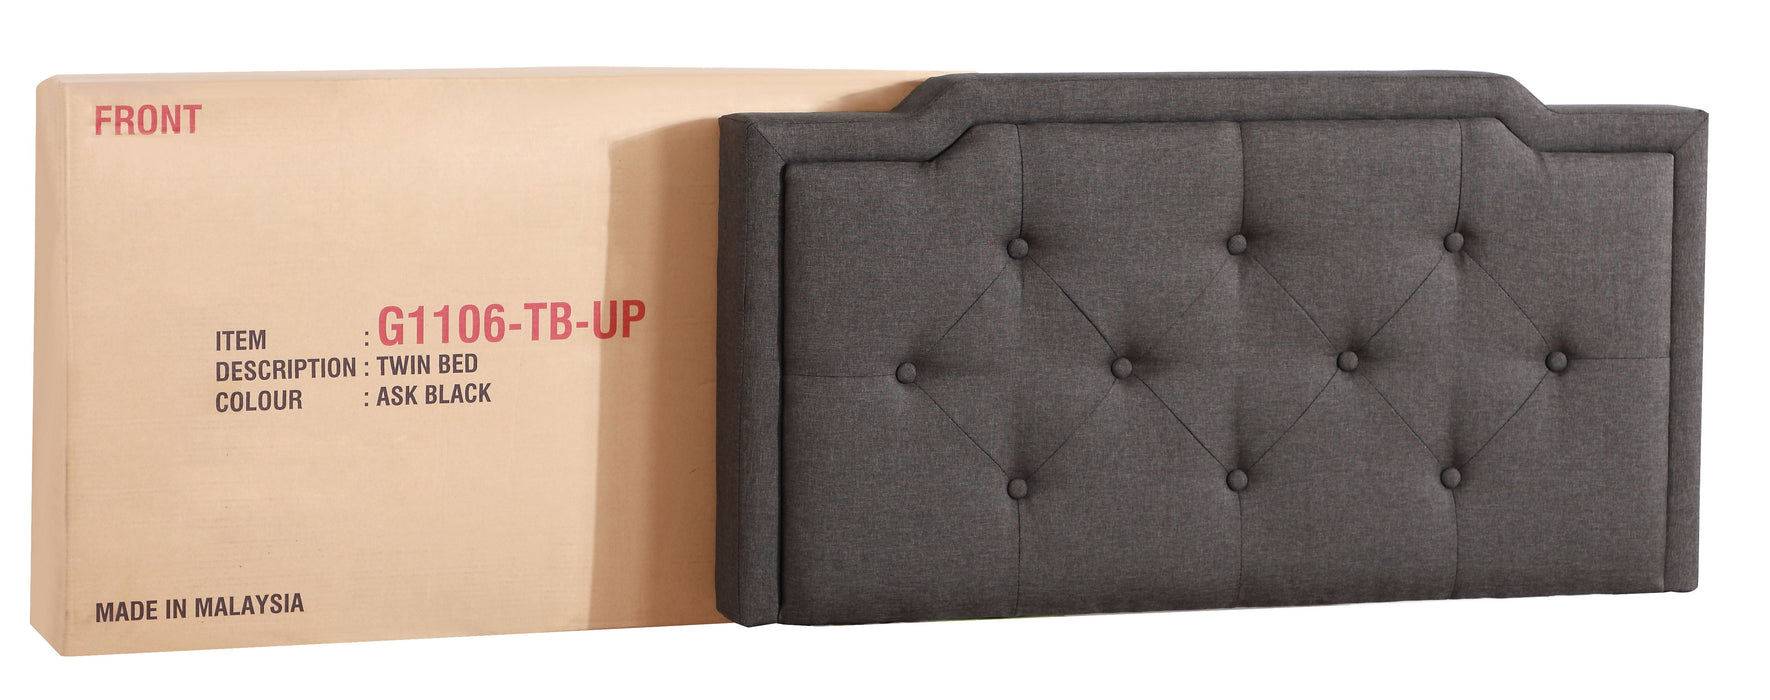 Deb - G1106-TB-UP Twin Bed (All in One Box) - Black